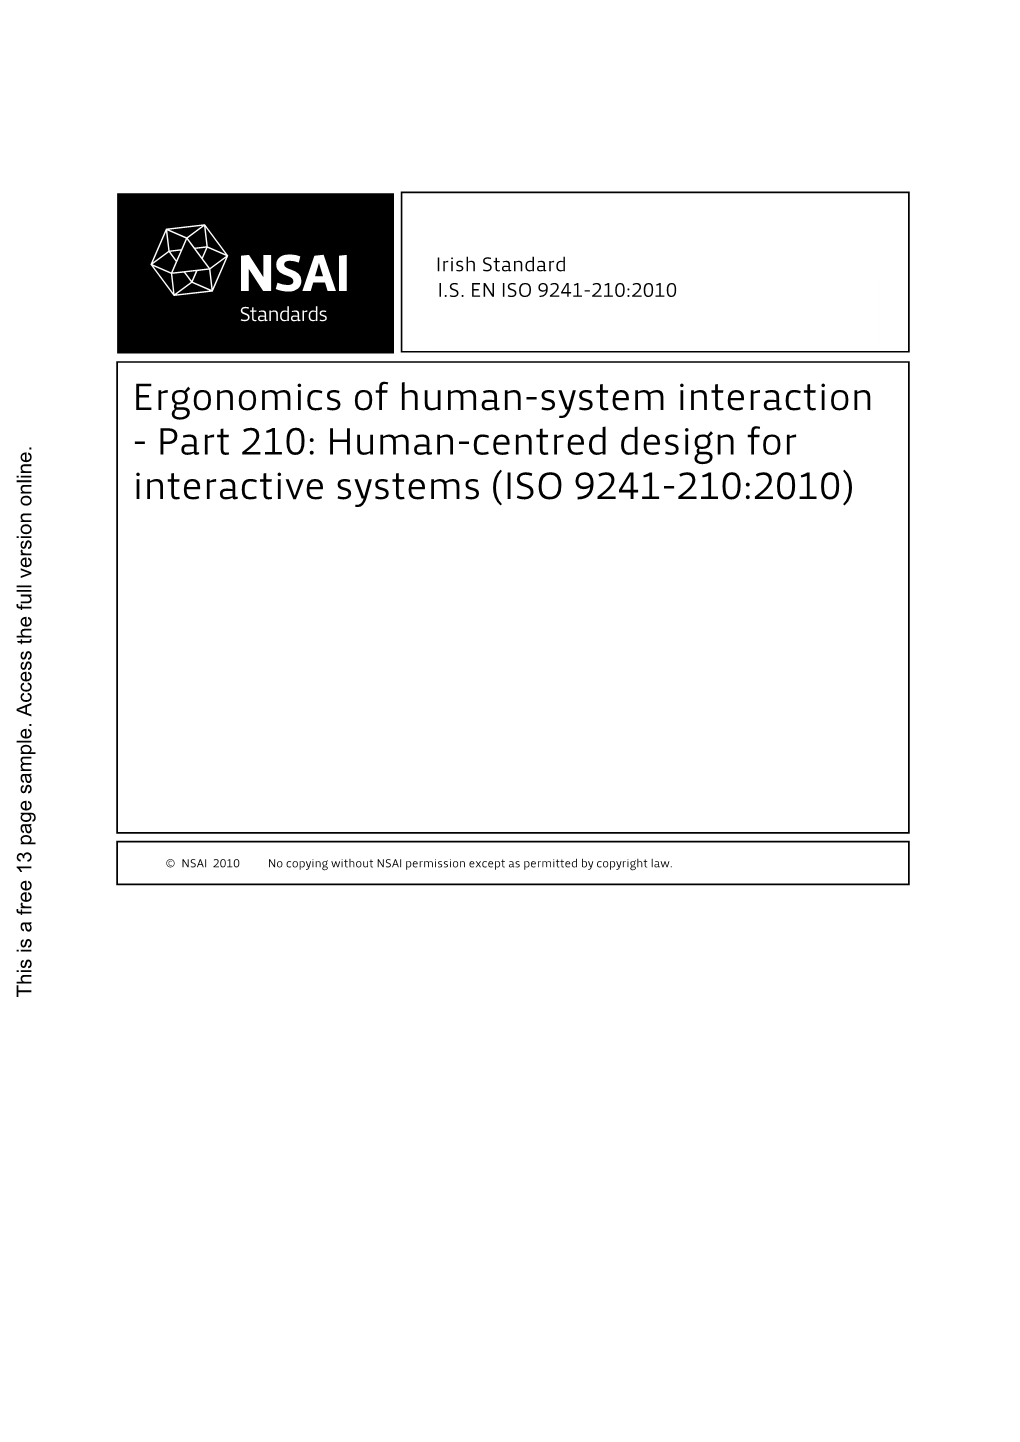 Human-Centred Design for Interactive Systems (ISO 9241-210:2010)